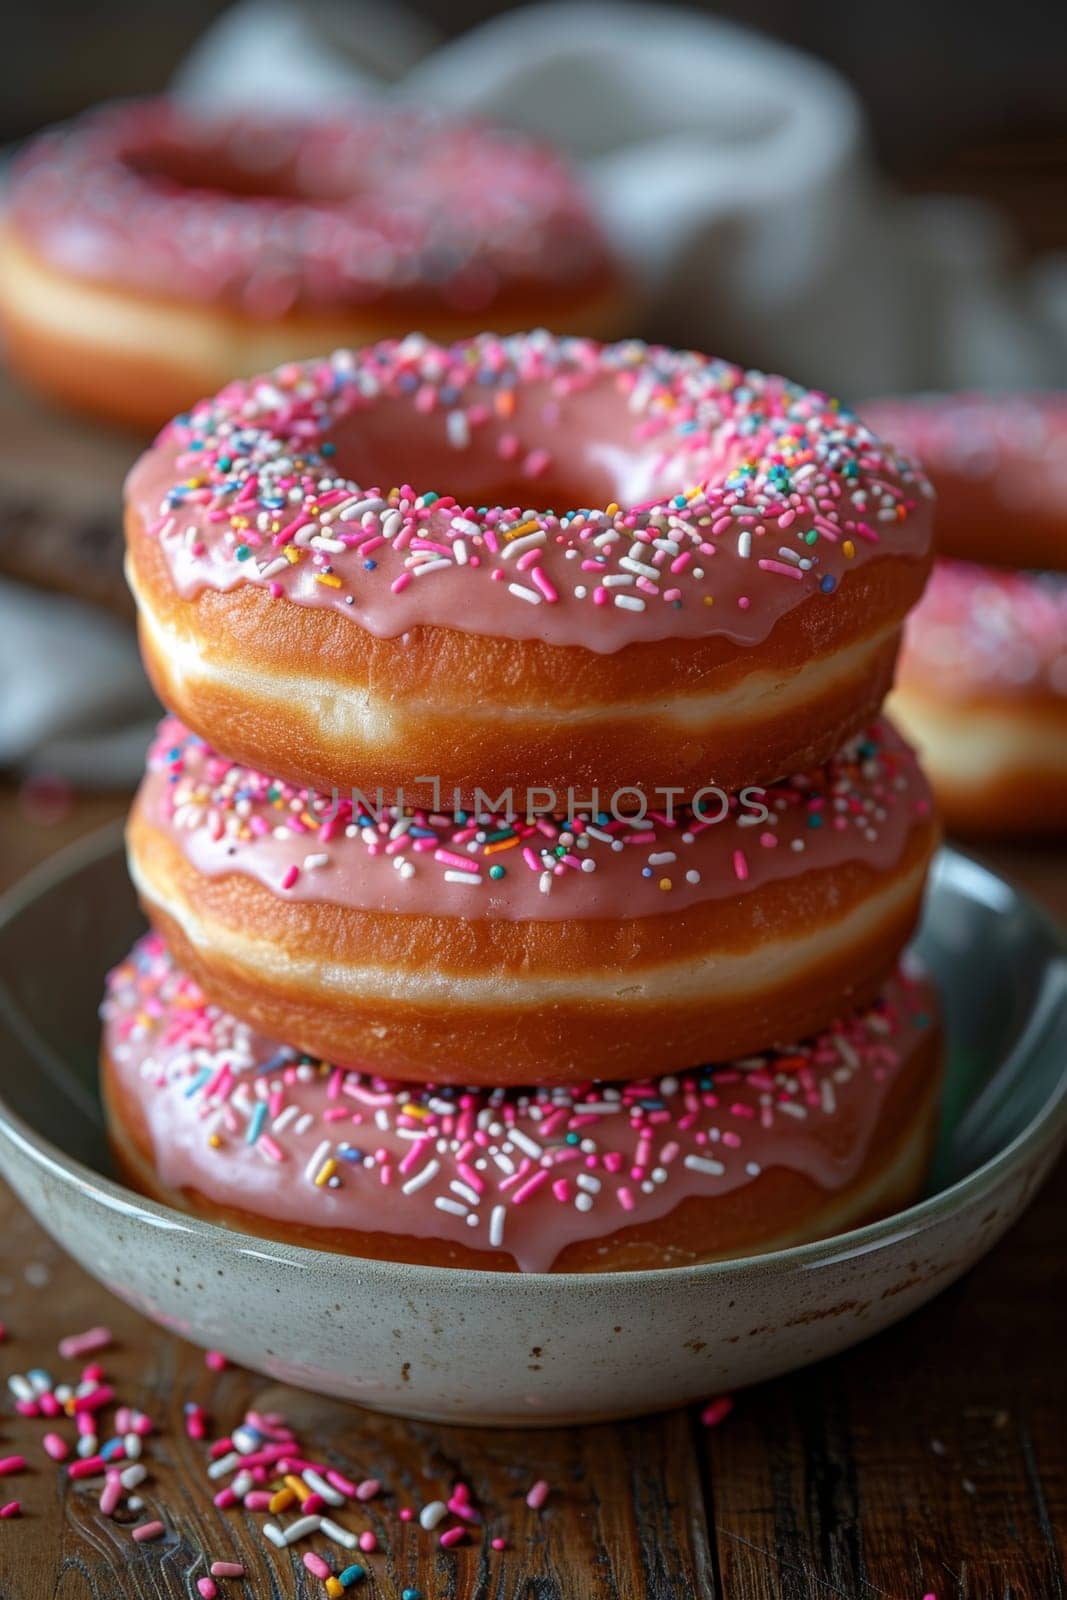 A set of donuts lying on a table. National Doughnut Day by Lobachad